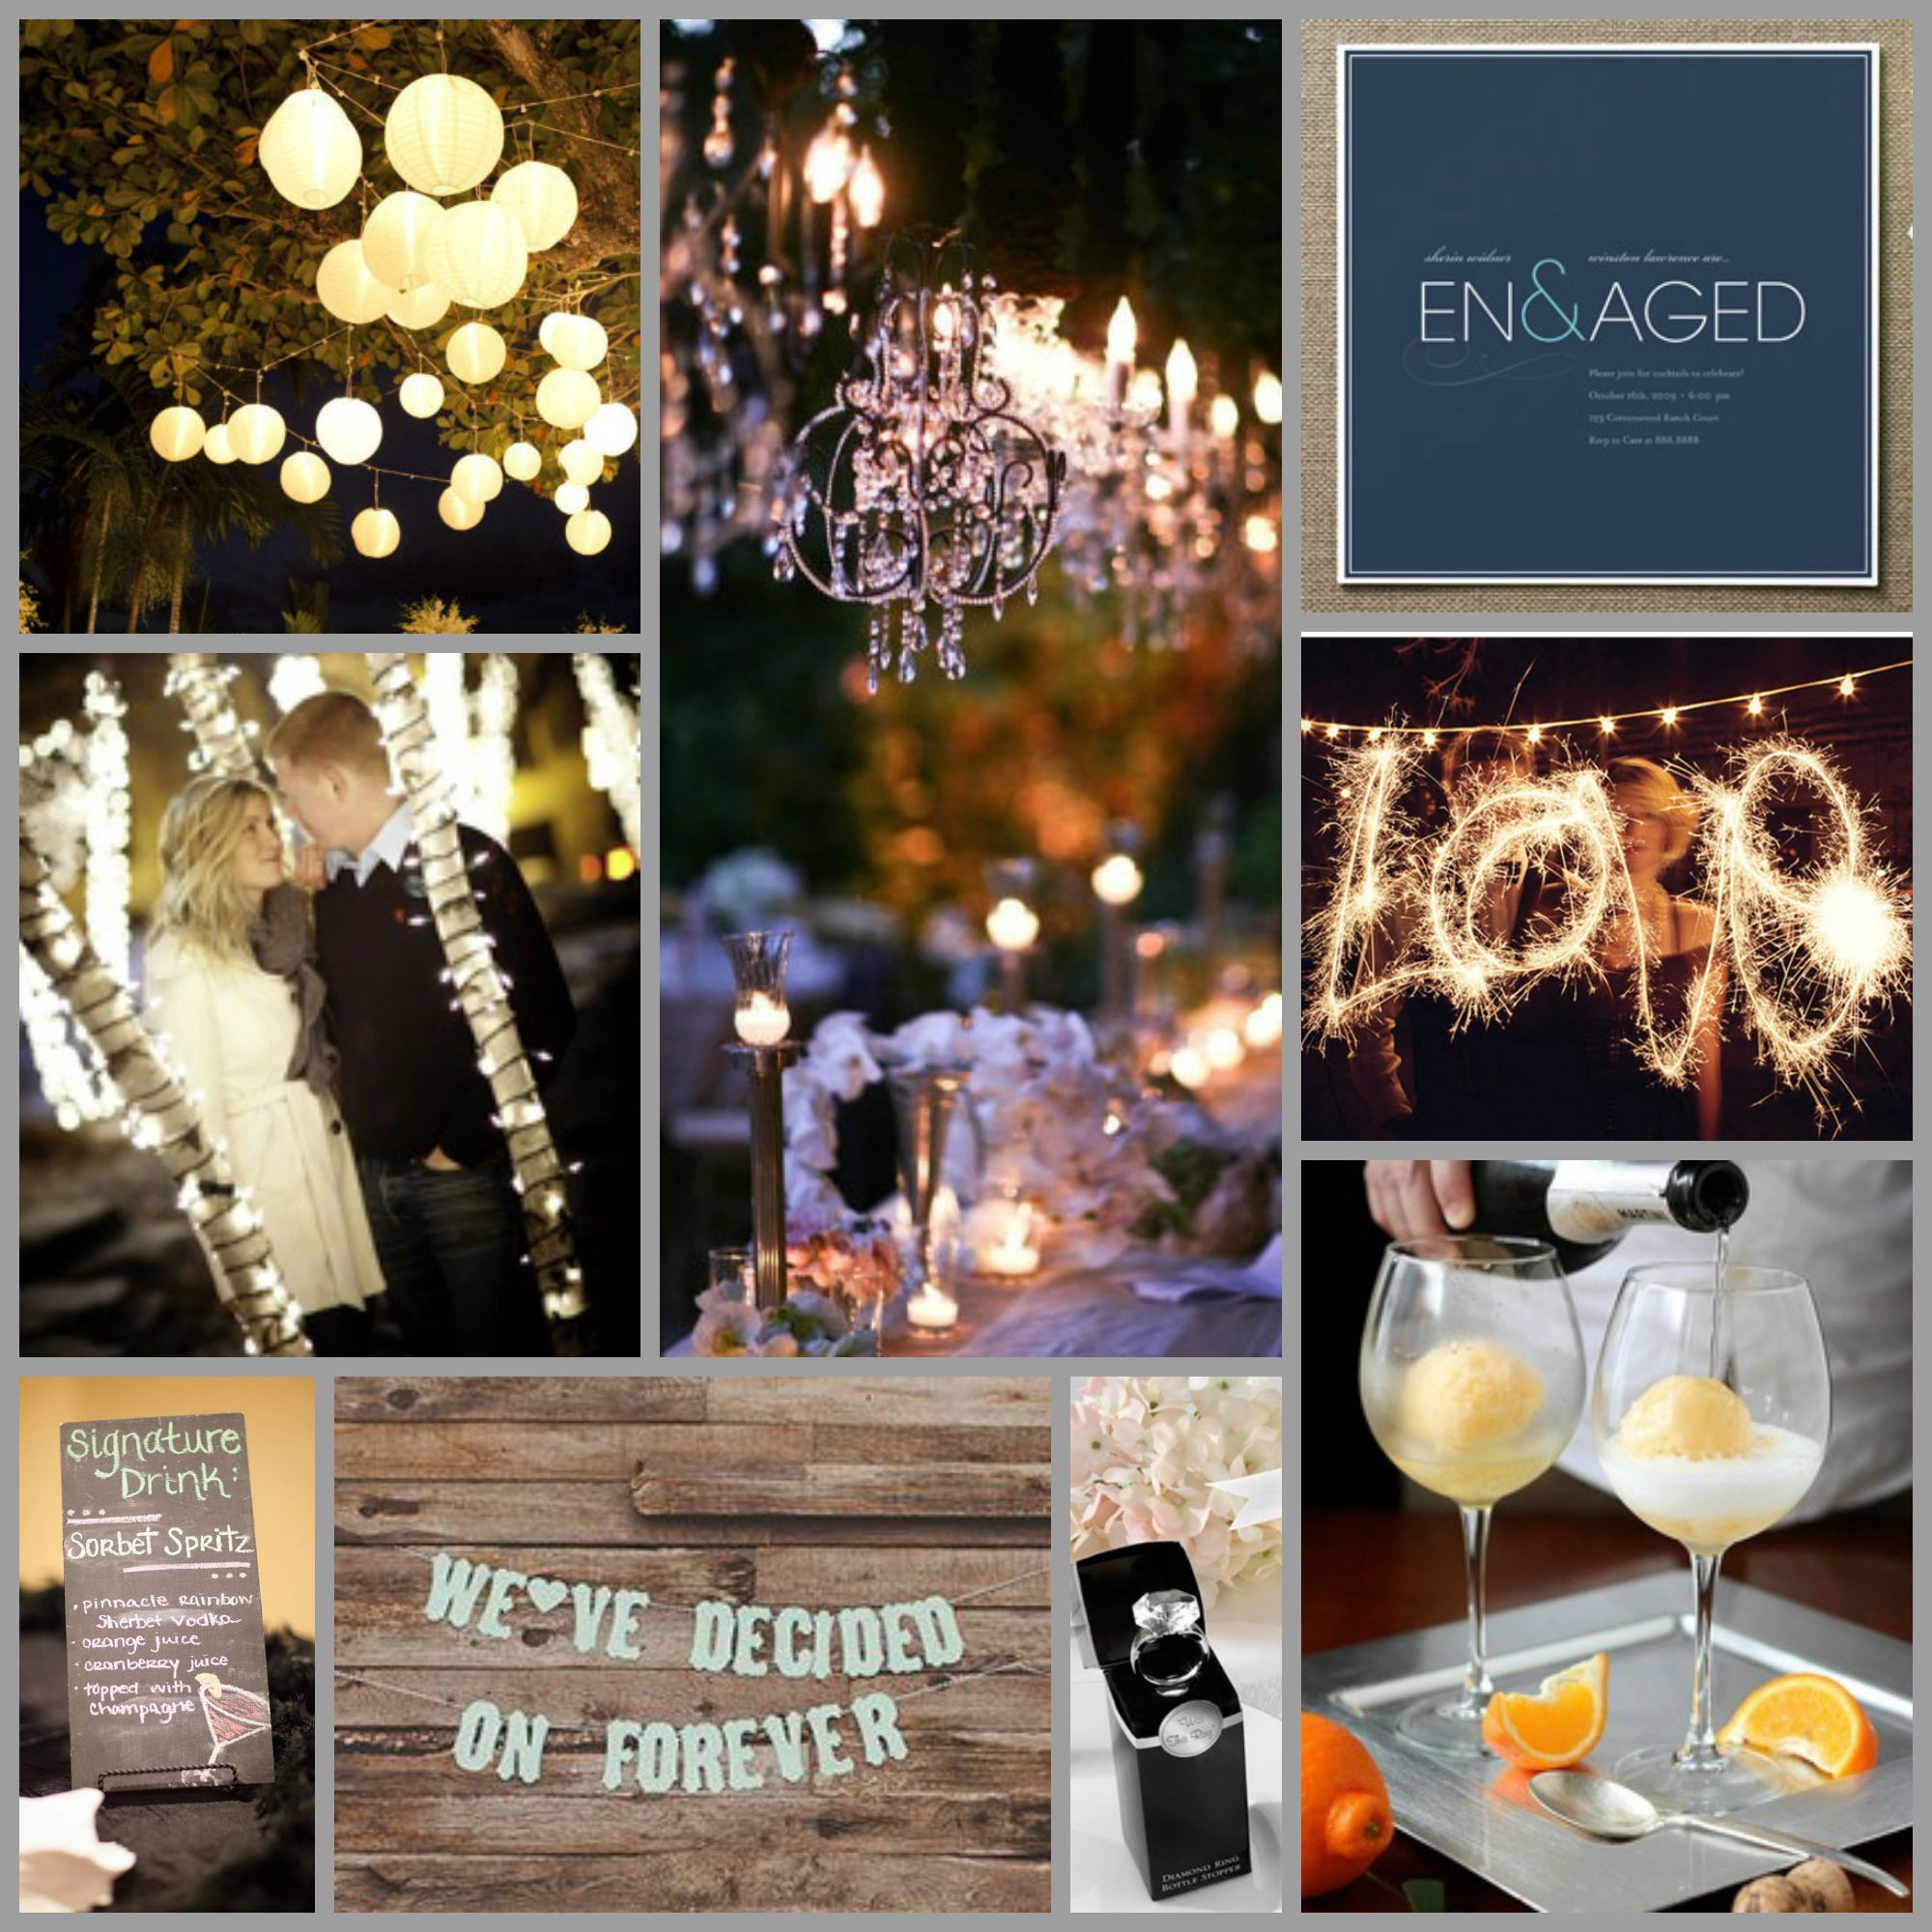 Backyard Engagement Party Decorating Ideas
 Outdoor Engagement Party Beautiful we ve decided on